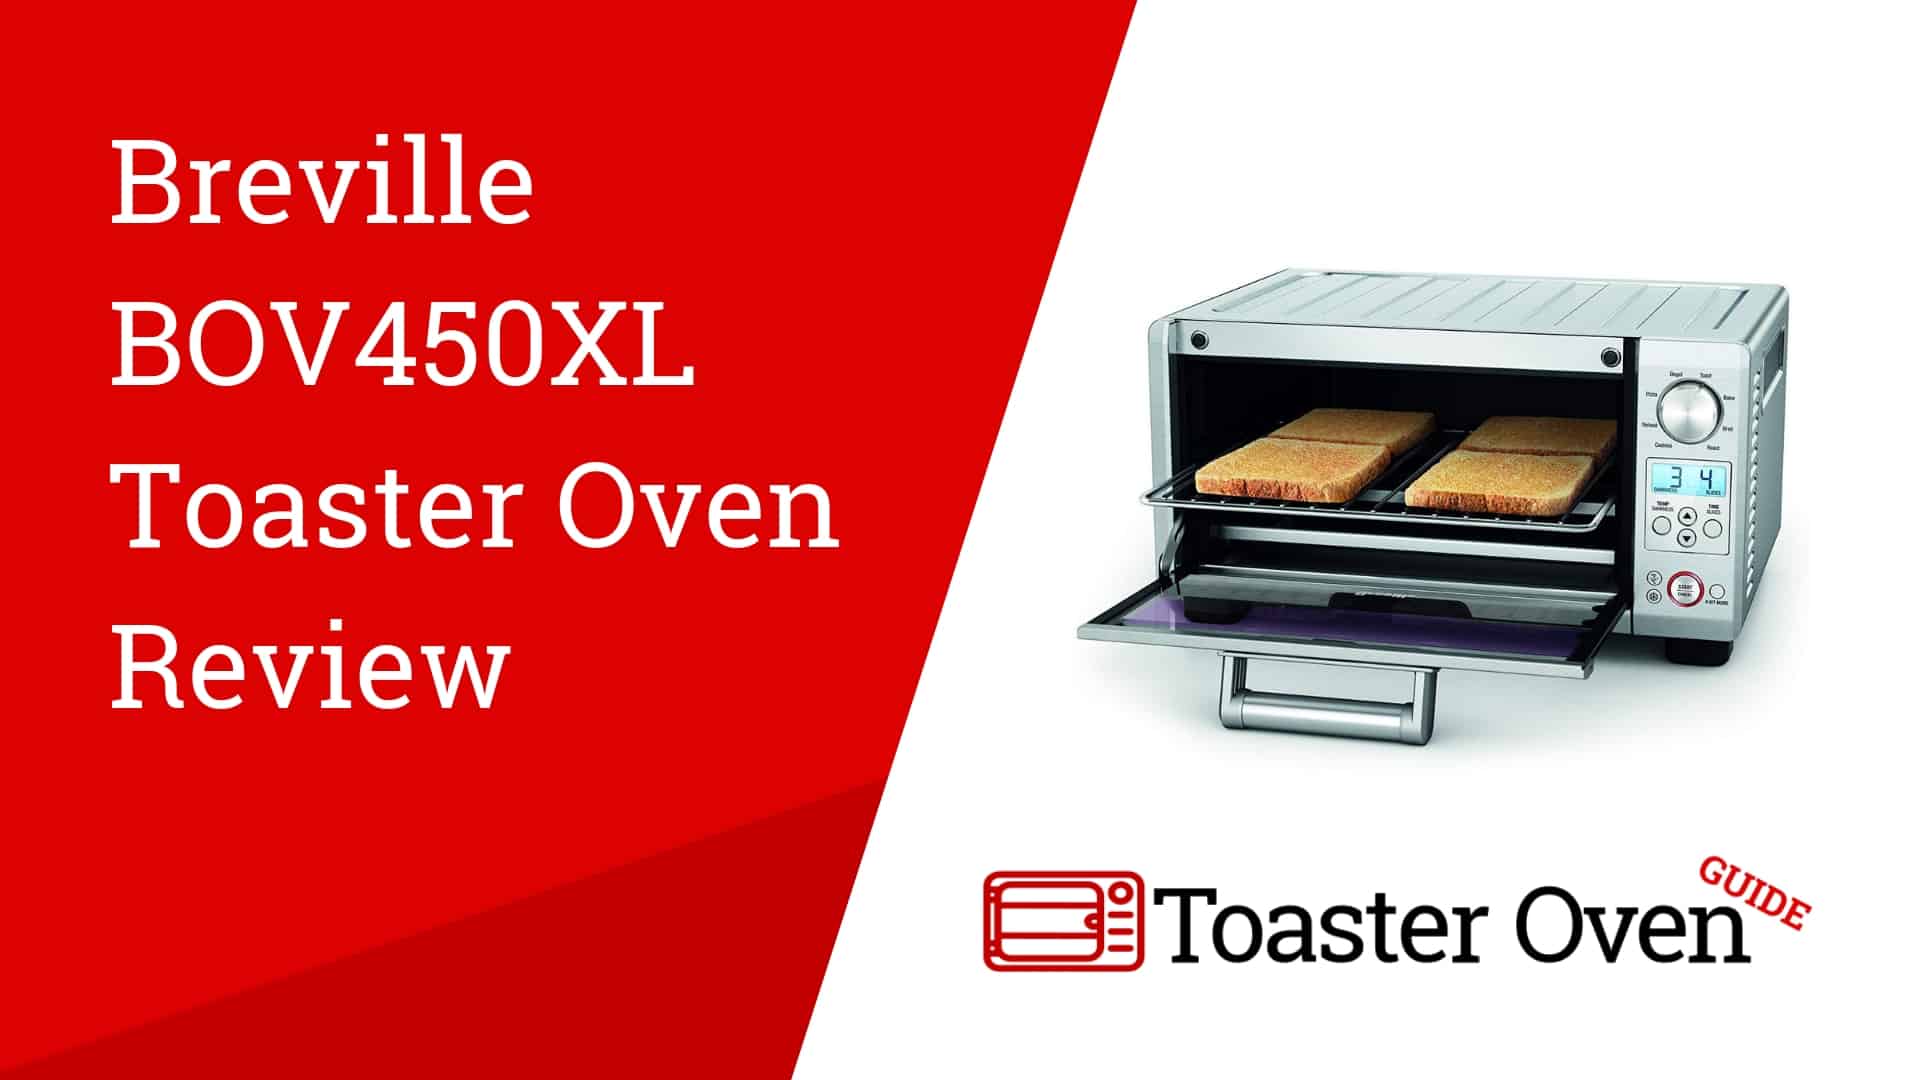 Breville Smart Oven Air reviews 2019: Here's what people are saying